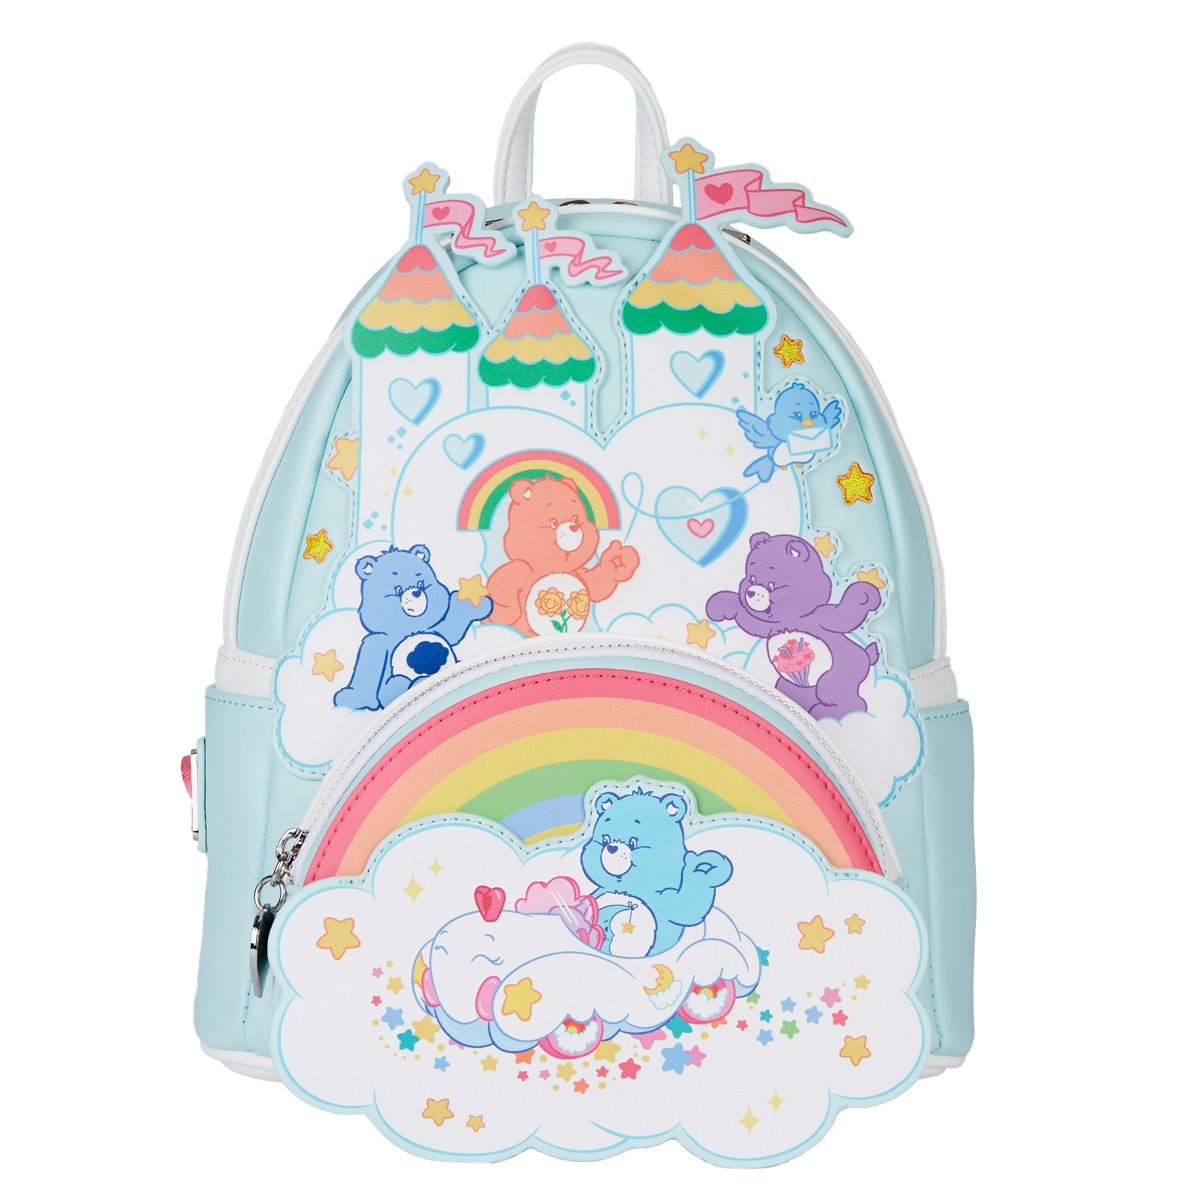 Loungefly Care Bears Heart Cloud Party Crossbody Bag with Rainbow Strap